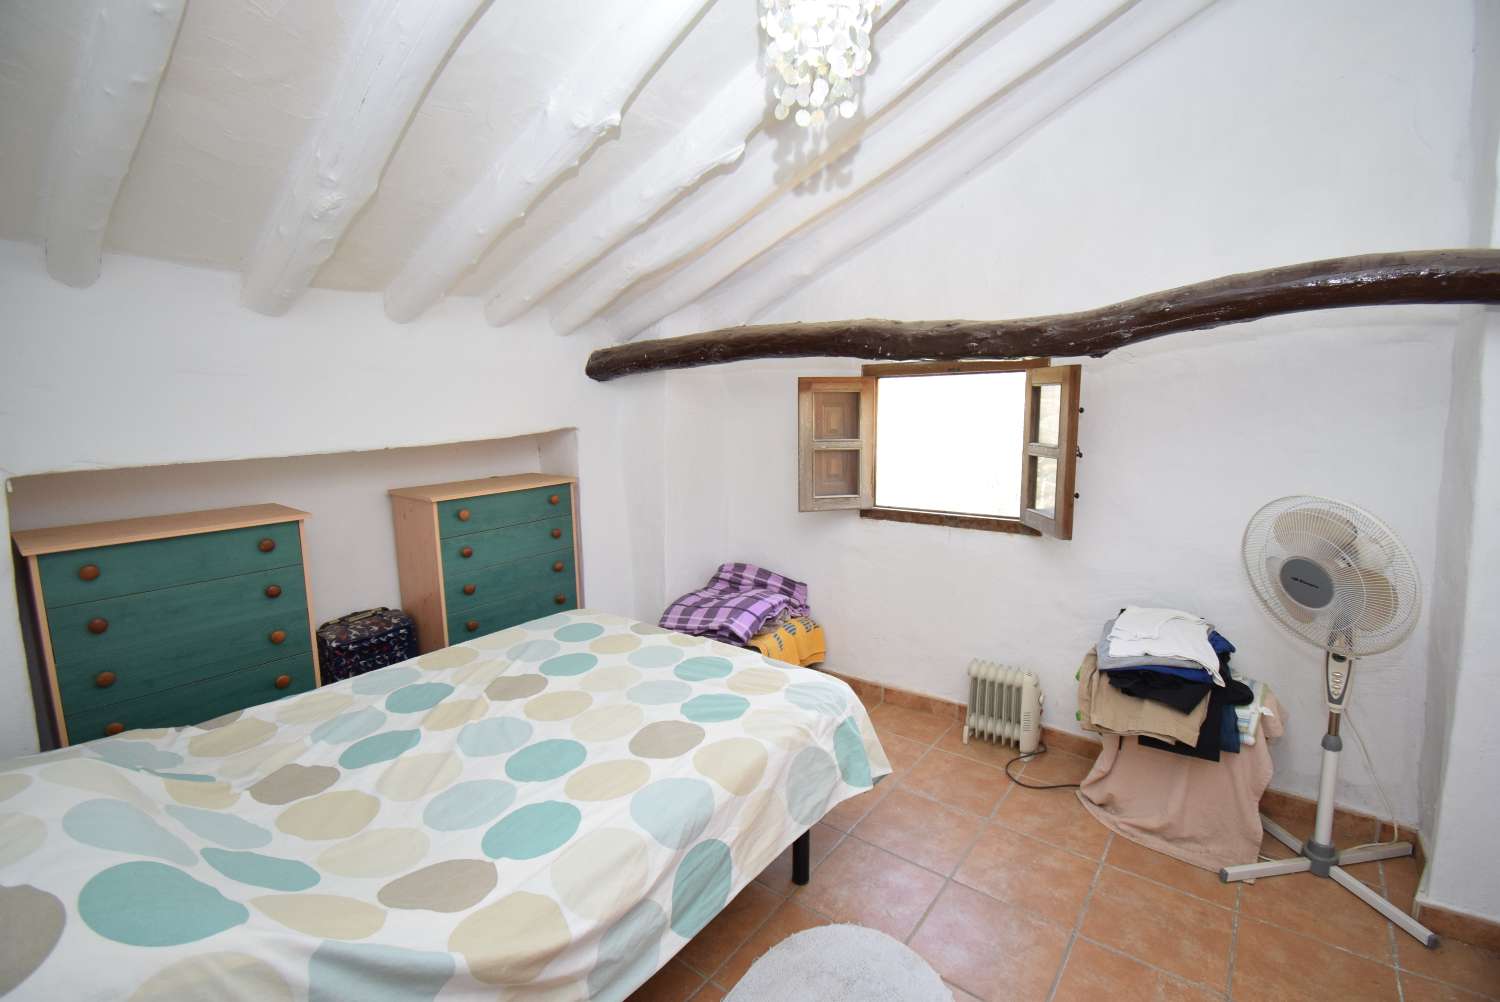 2 BED COTTAGE WITH SEPARATE ANNEX EN-SUITE  WITH STUNNING VIEWS